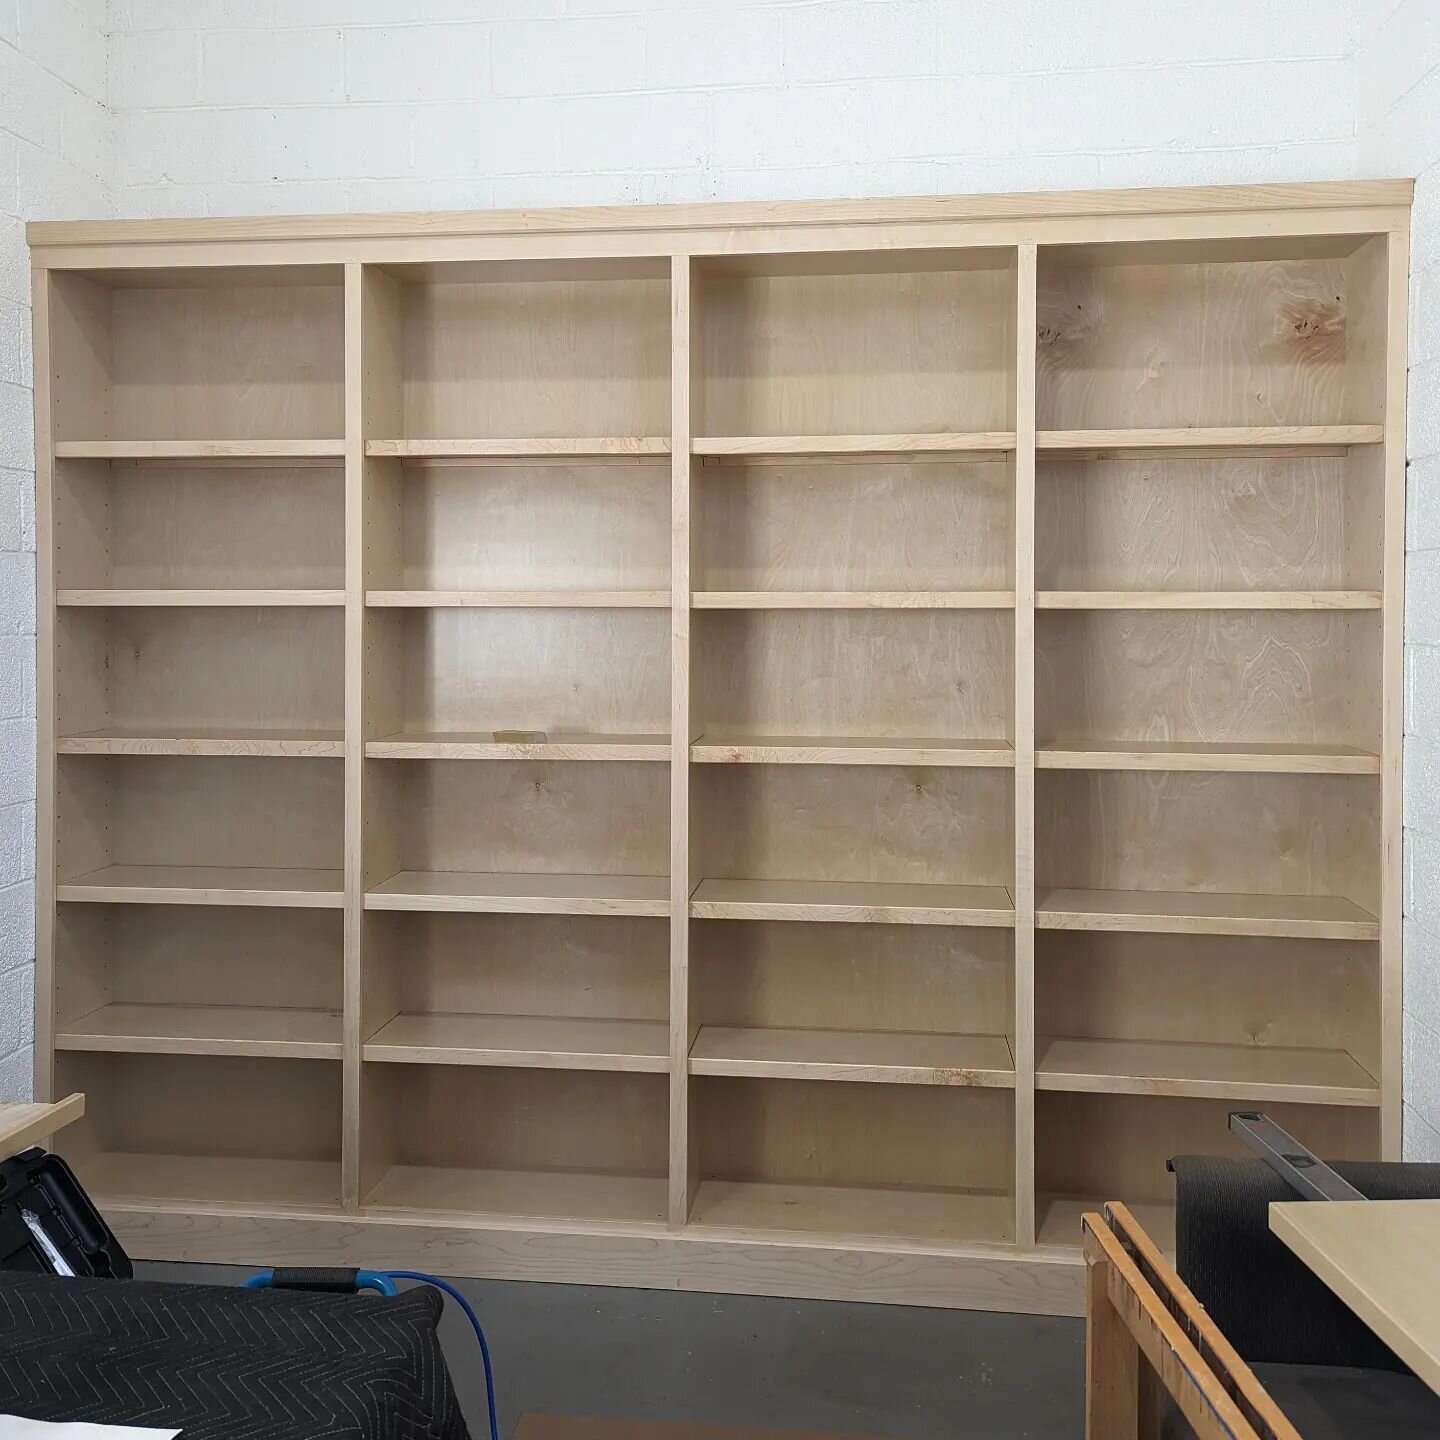 After talking about it for years, I finally set aside some time to build the bookshelves in the shop. Now comes the hard part - sorting, organizing, and shelving the hundreds and hundreds of books and magazines I have. The world largest woodworking l